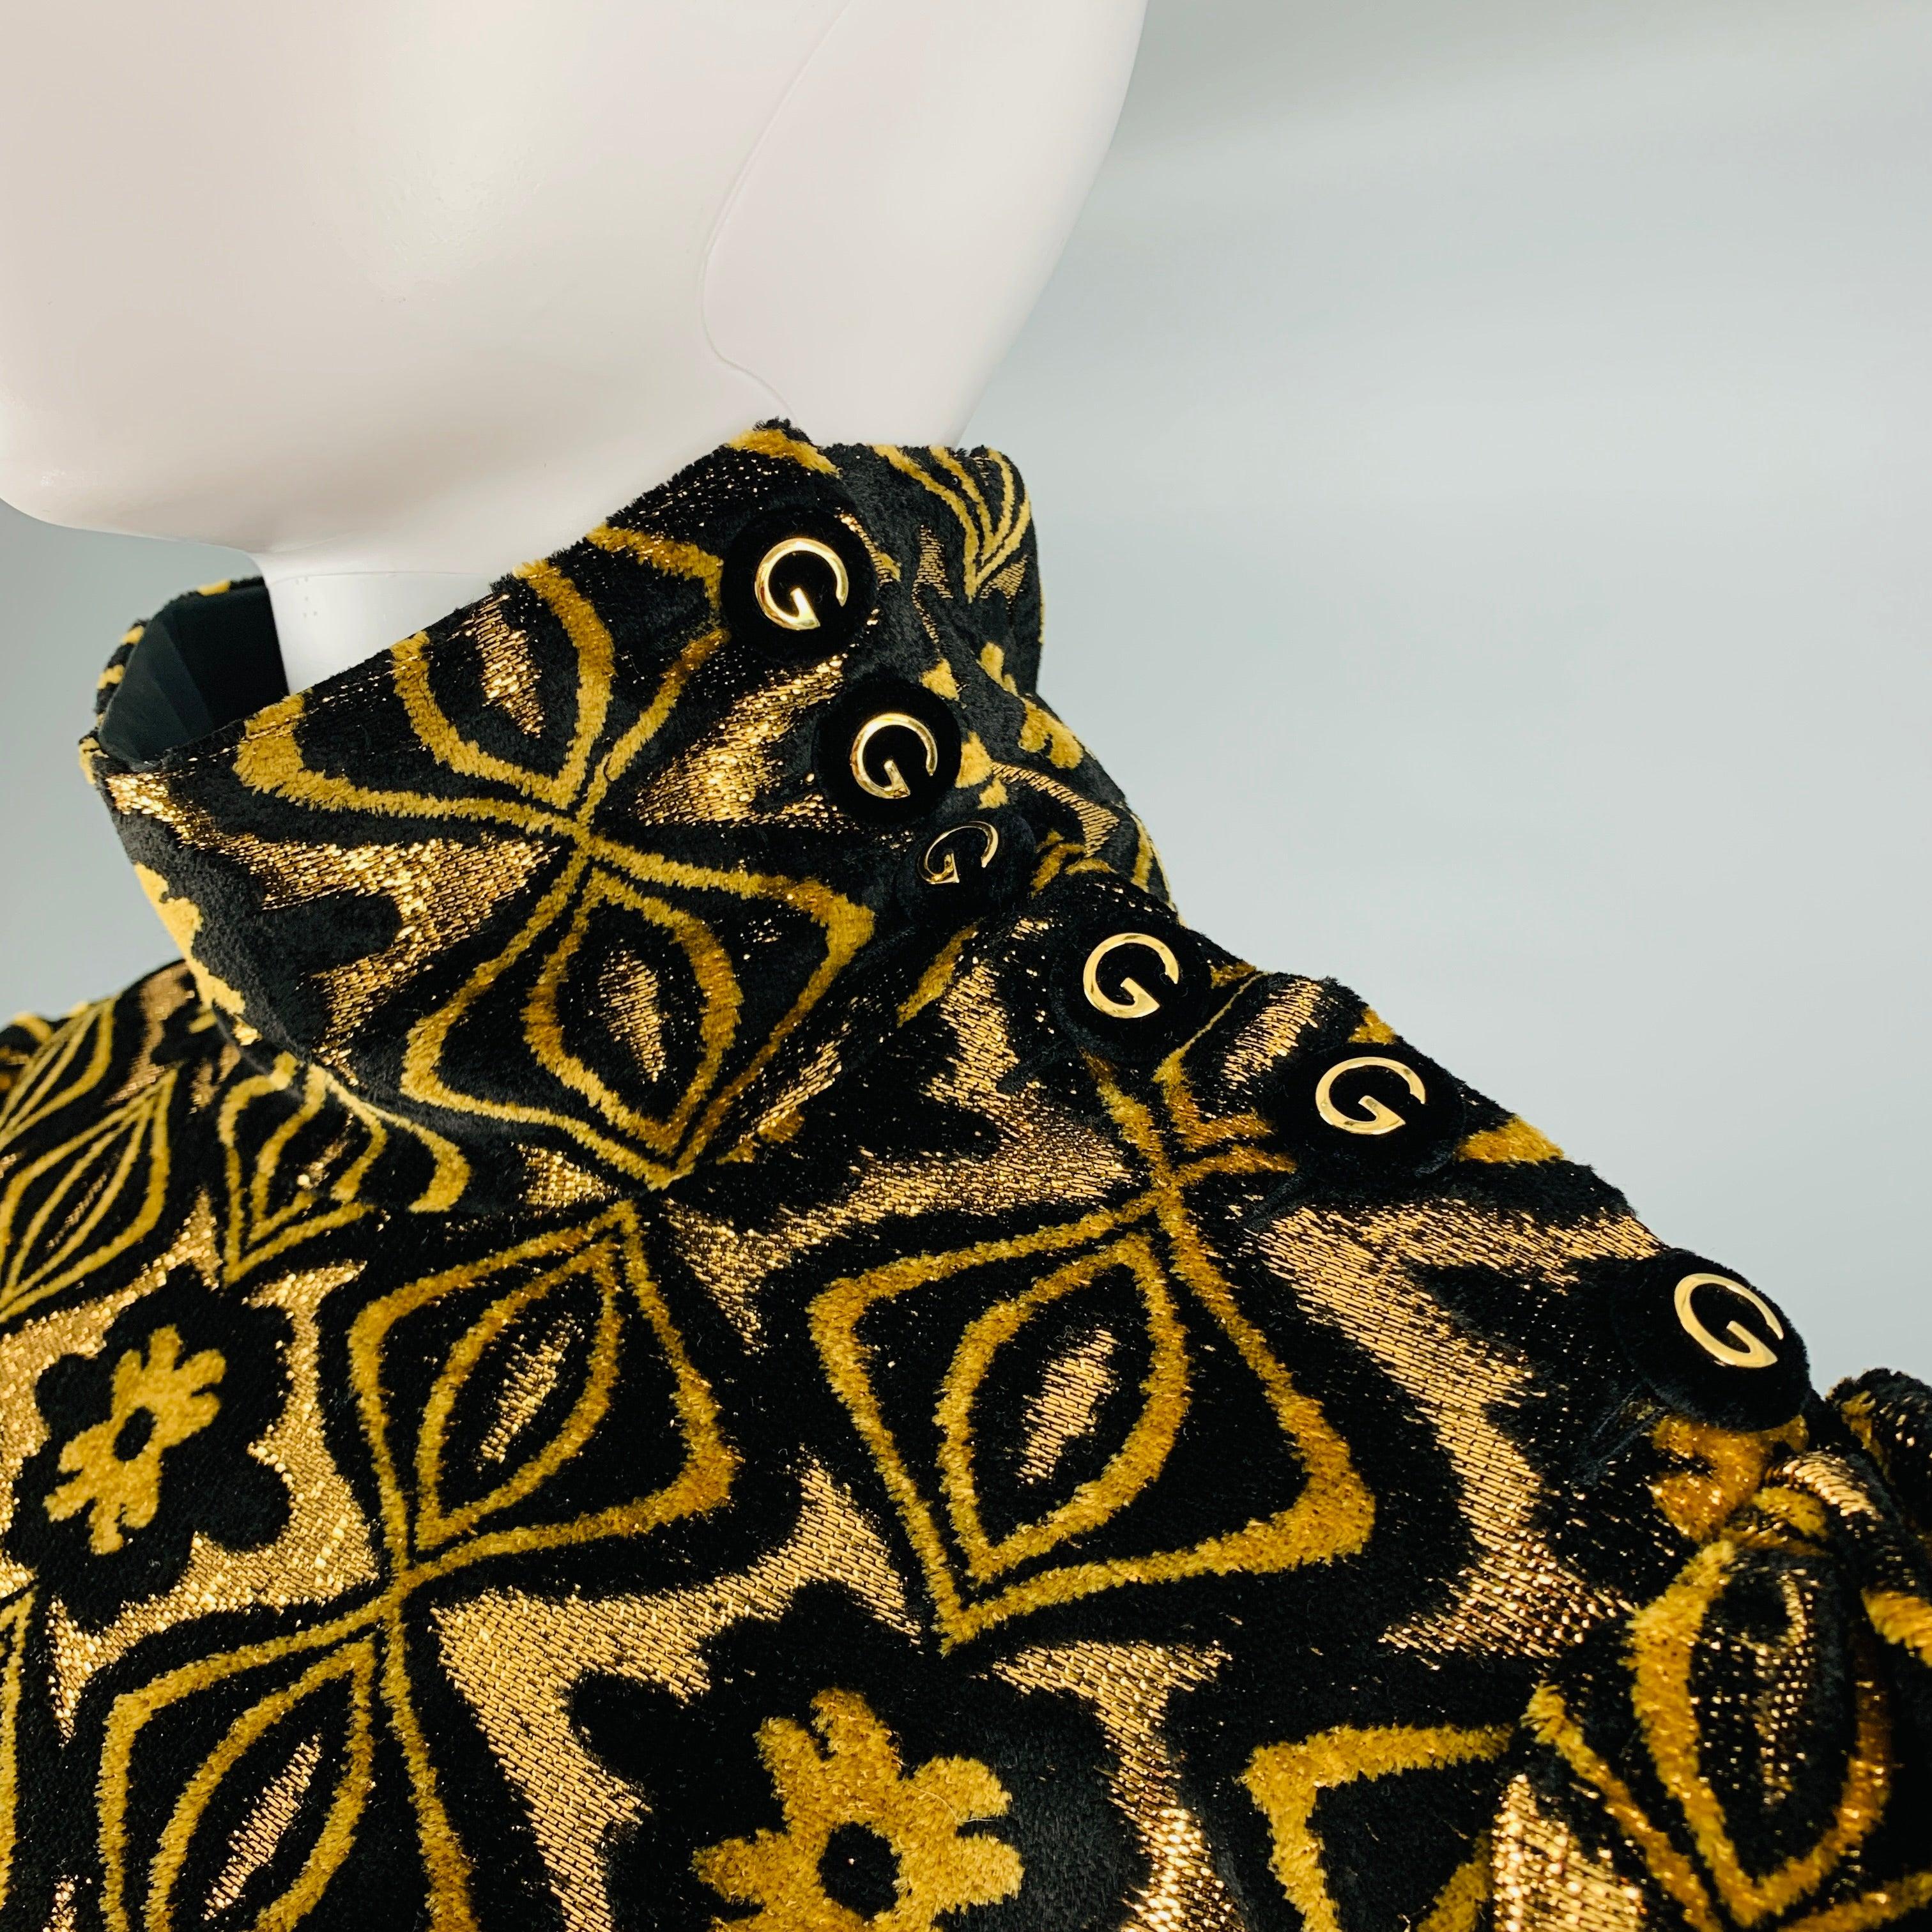 GUCCI cocktail dress comes in a black and gold viscose blend velvet features a high collar, half button closure with GG logo, long sleeve design, and long zip up closure. Made in Italy.Very Pre-Owned Condition. As-Is -2 Buttons replaced at cuffs